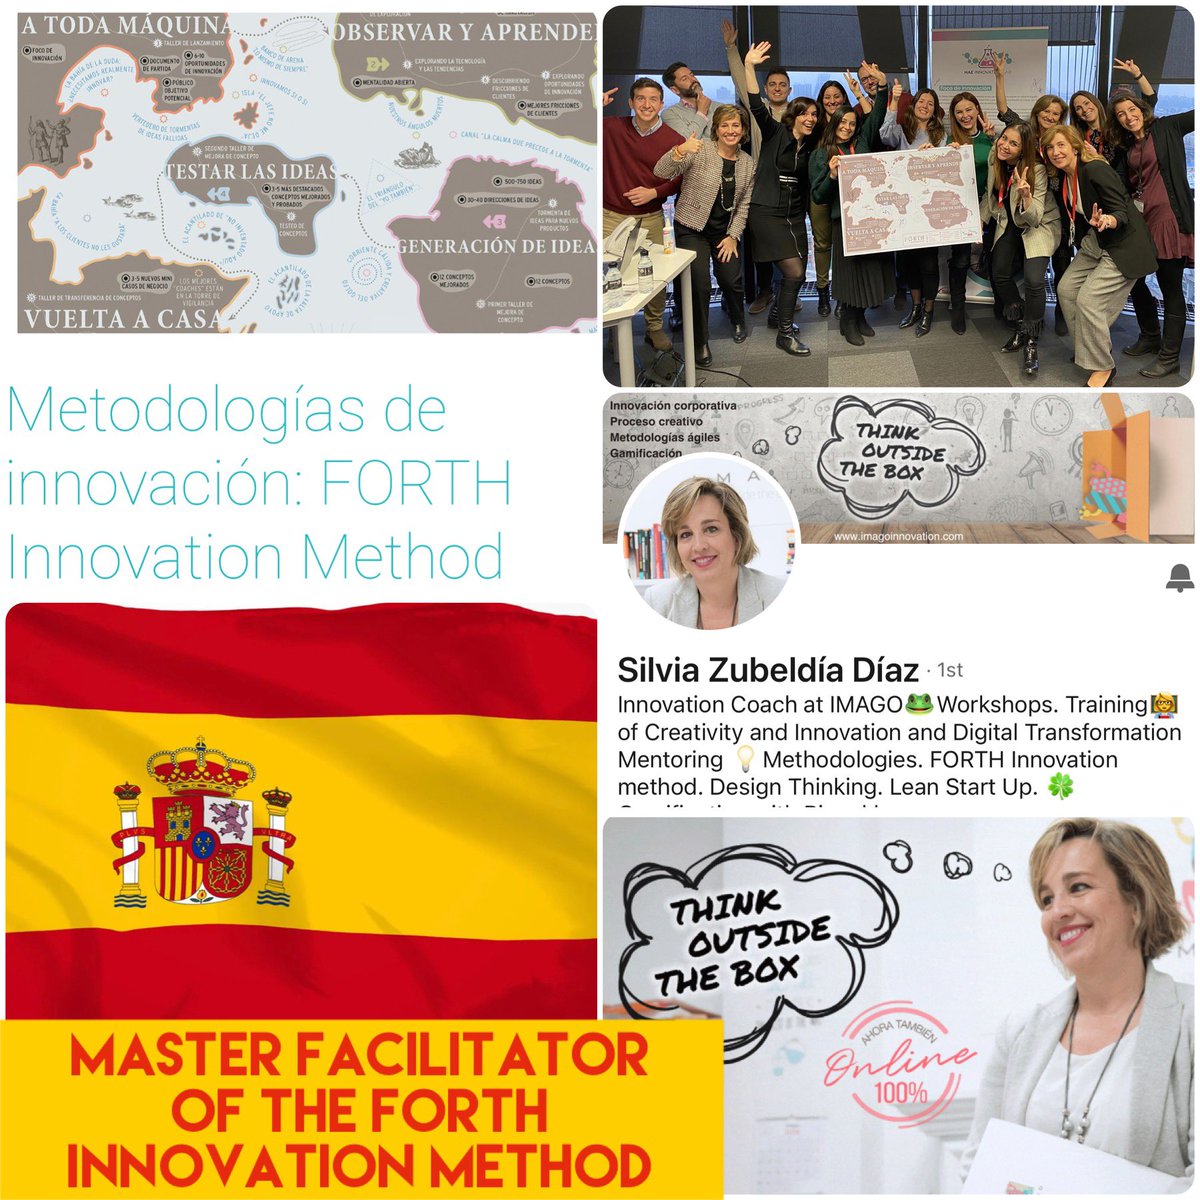 So proud that she is facilitating many innovation projects with the proven FORTH innovation method in Spain 🇪🇸, I like to put Silvia Zubeldía Díaz in the spotlights. Check out … linkedin.com/posts/gijsvanw… #Innovación #innovation #designthinking